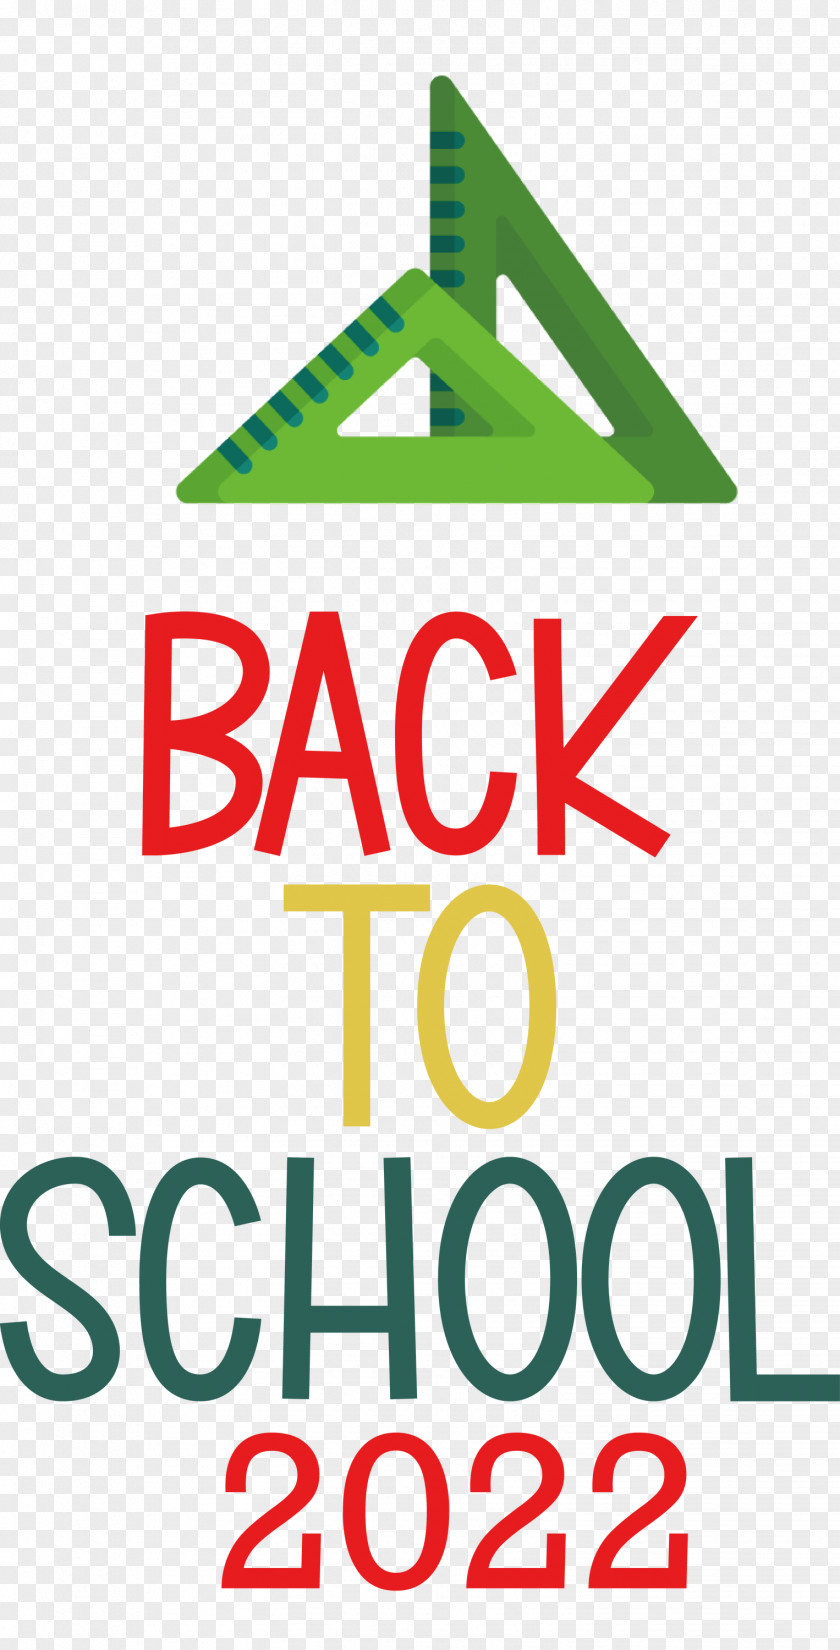 Back To School 2022 Education PNG